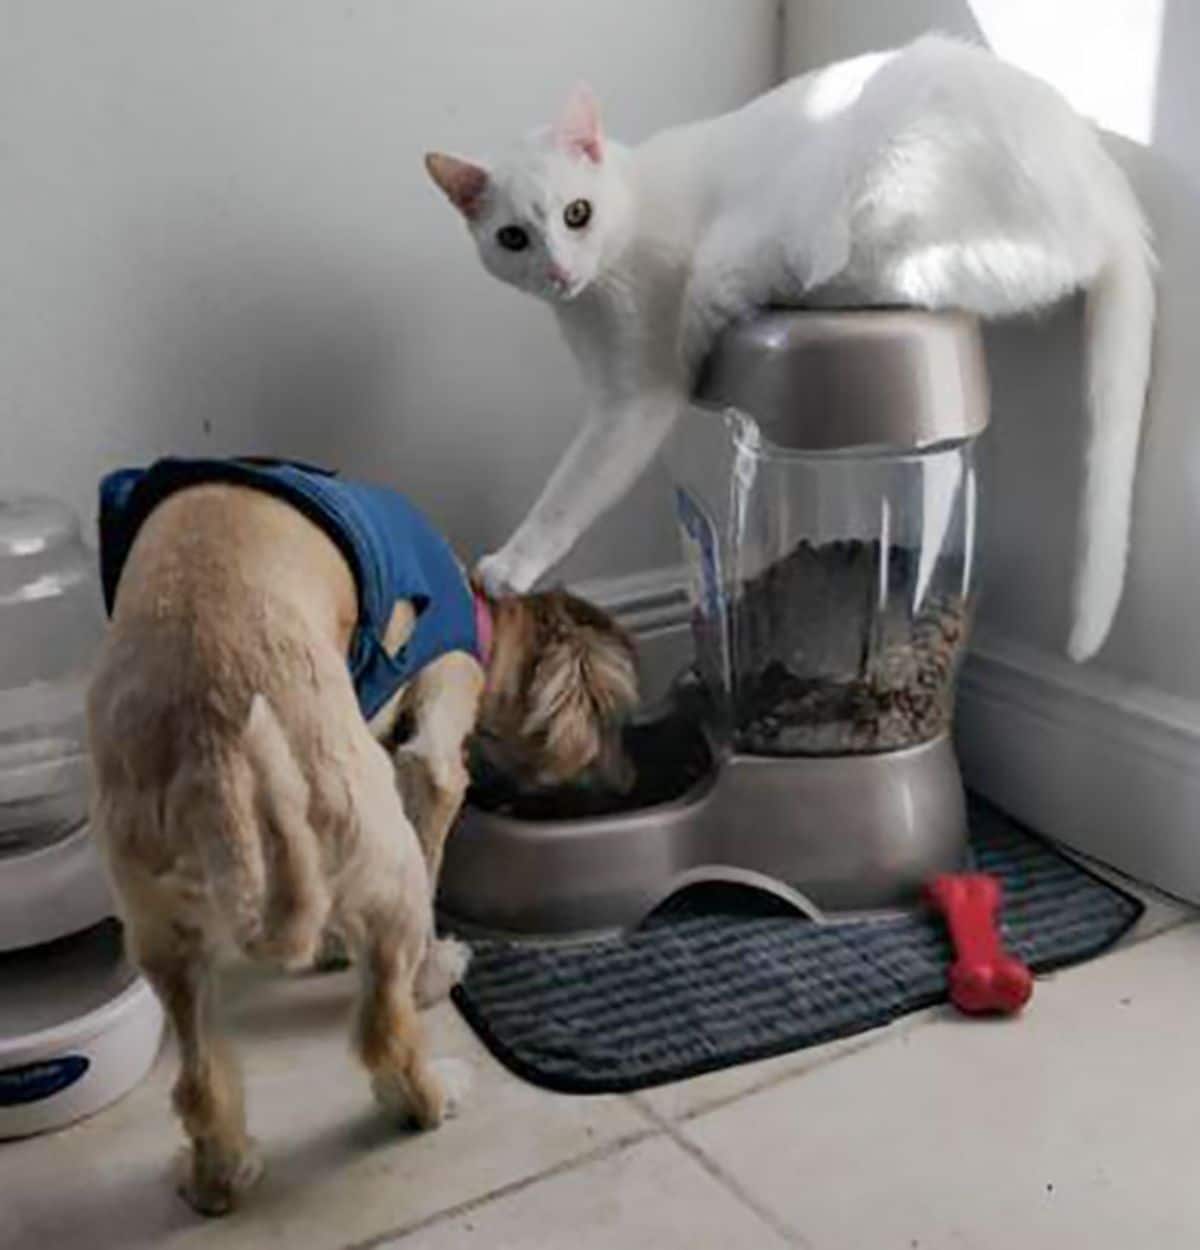 white cat standing on an automatic dog feeder and poking a brown dog while it's eating